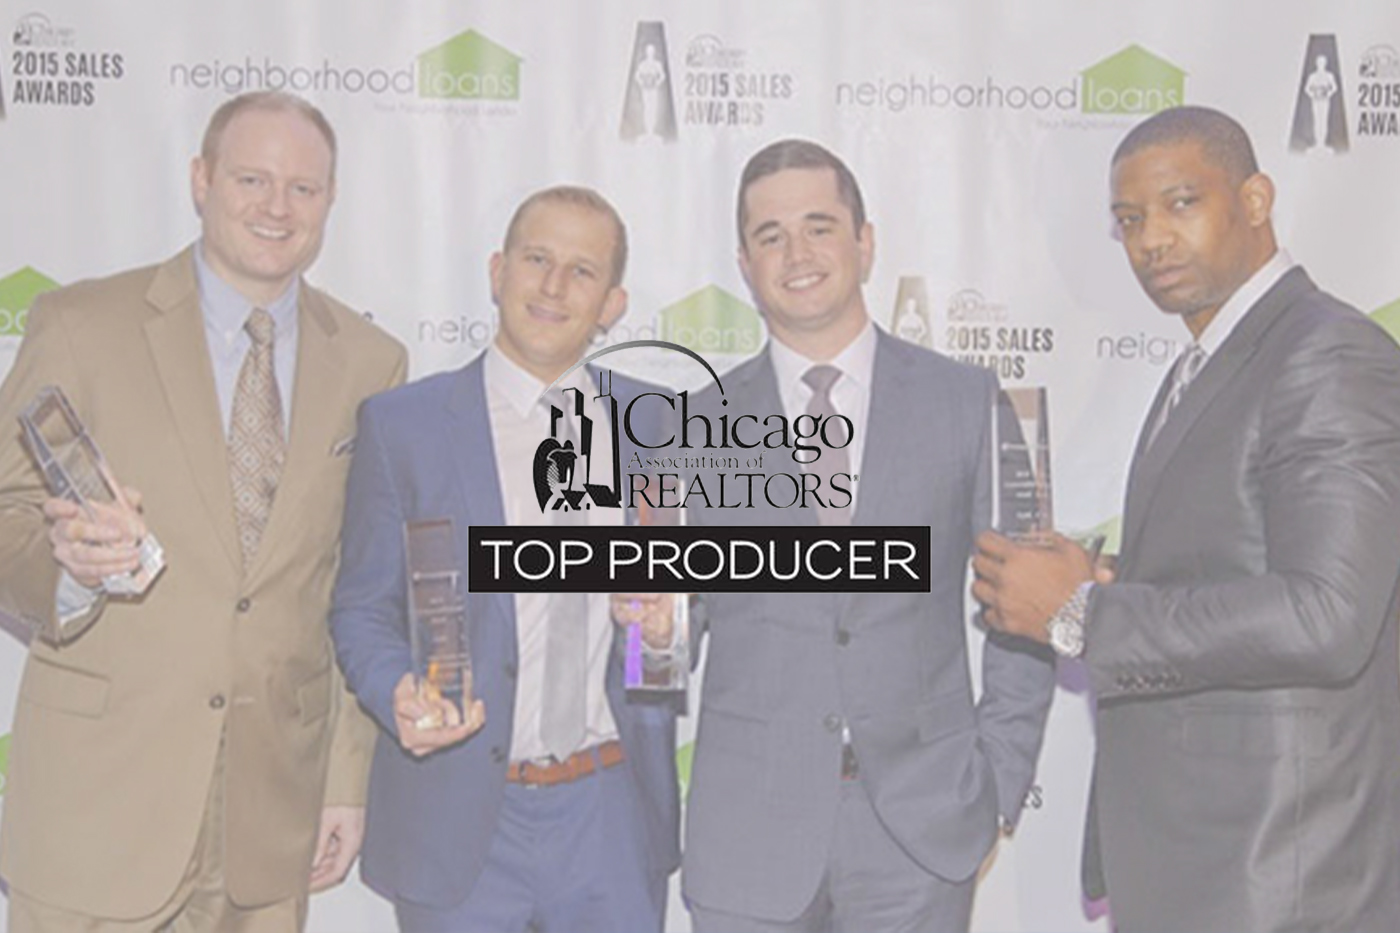 CommercialForum a division of Chicago Association of Realtors® (C.A.R.) Recognizes CRER Brokers as Top Chicago Commercial Producers in 2015